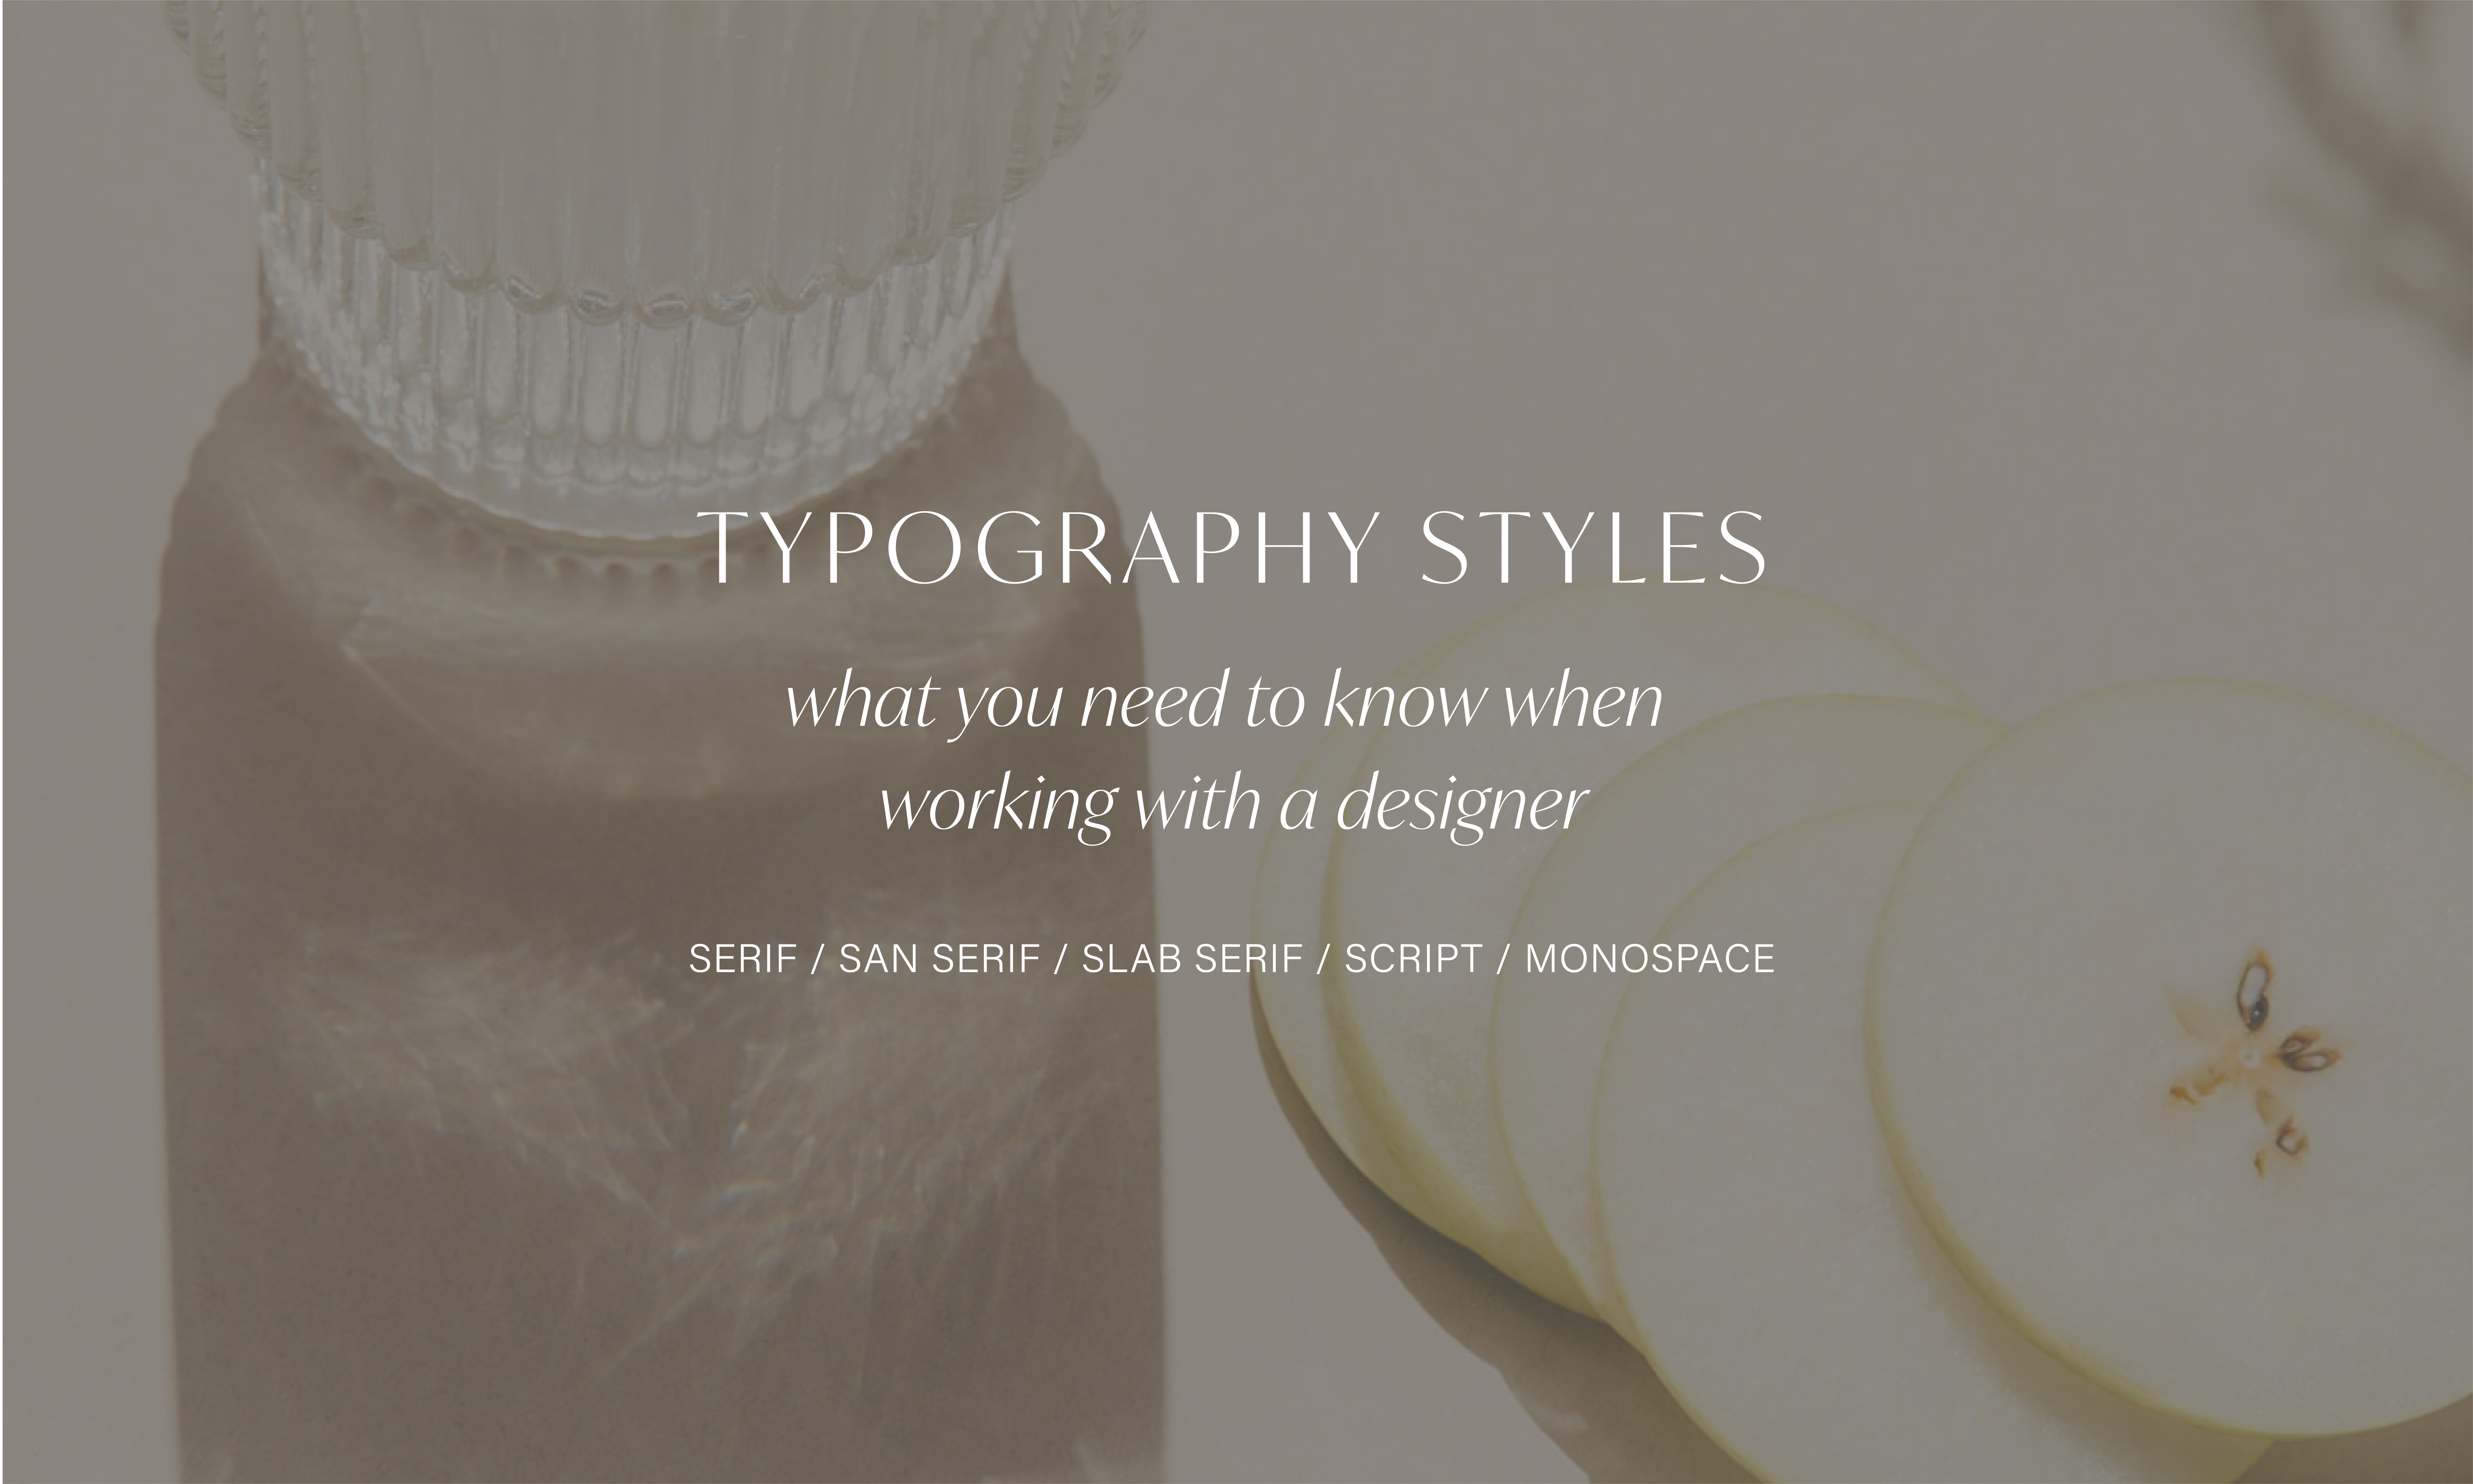 Typography Styles - What to Know When Working with a Designer